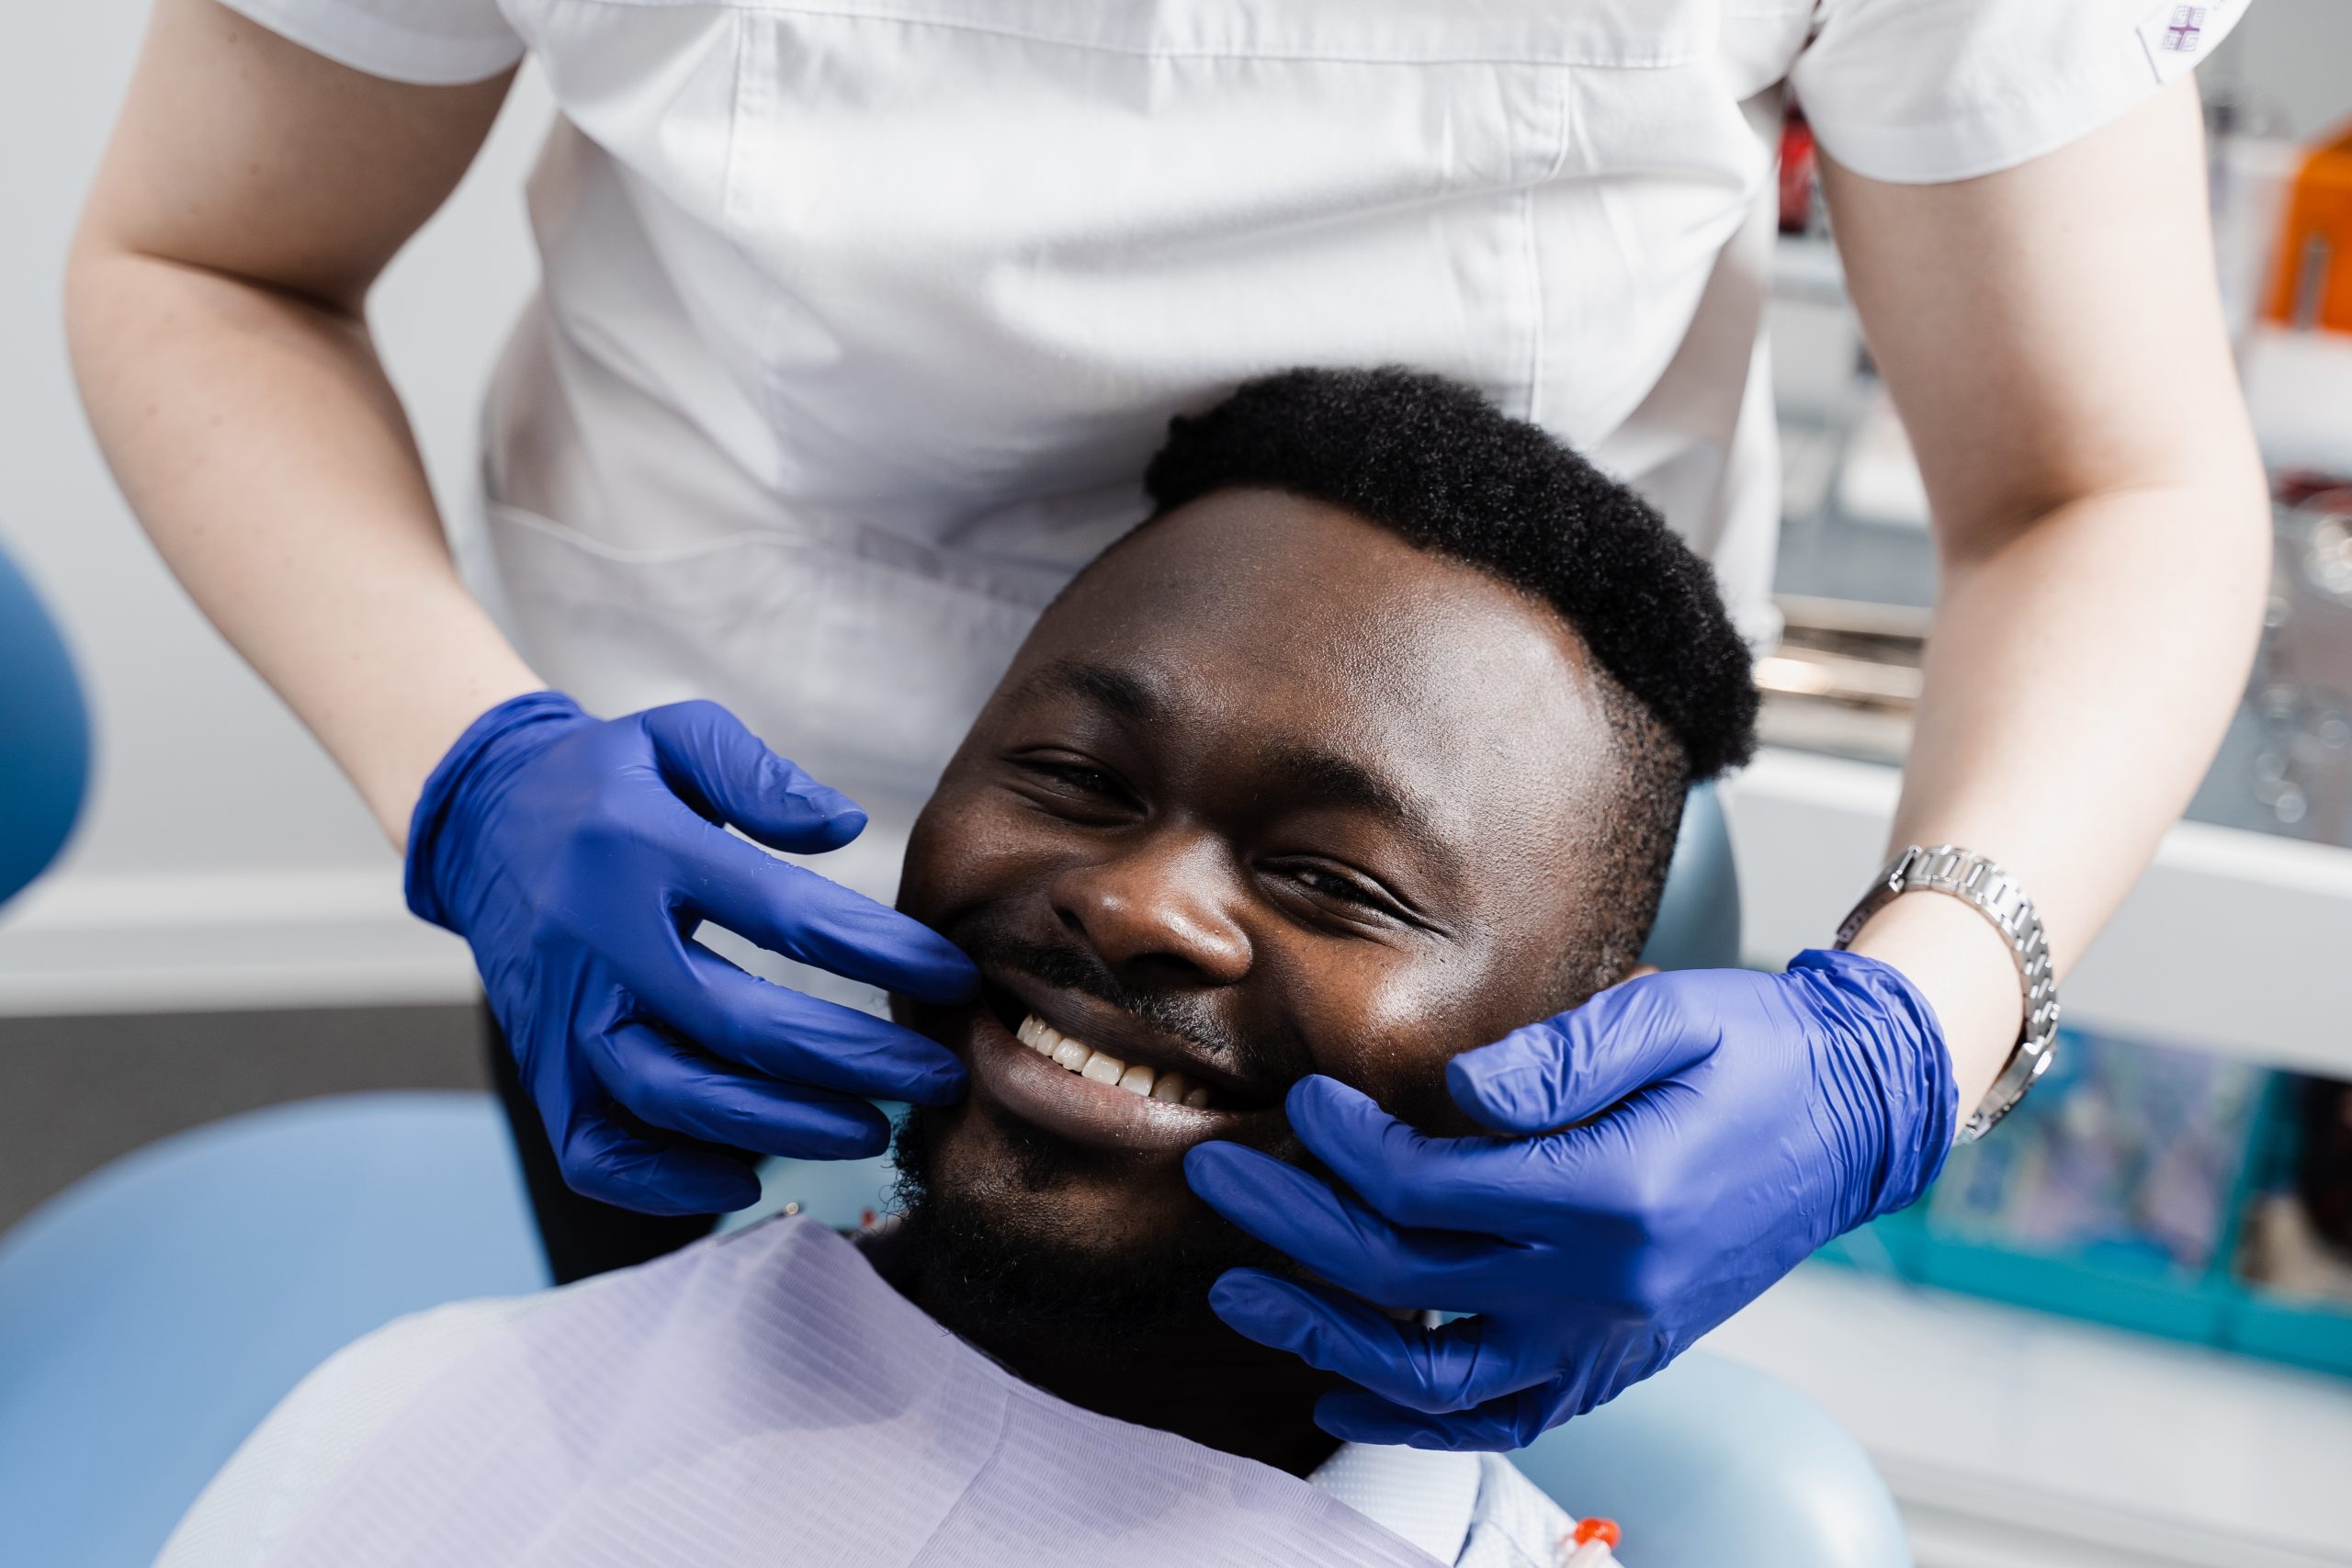 A man reclines in a dental chair and smiles as a gloved dentist examines his teeth and screens for oral and oropharyngeal cancer.